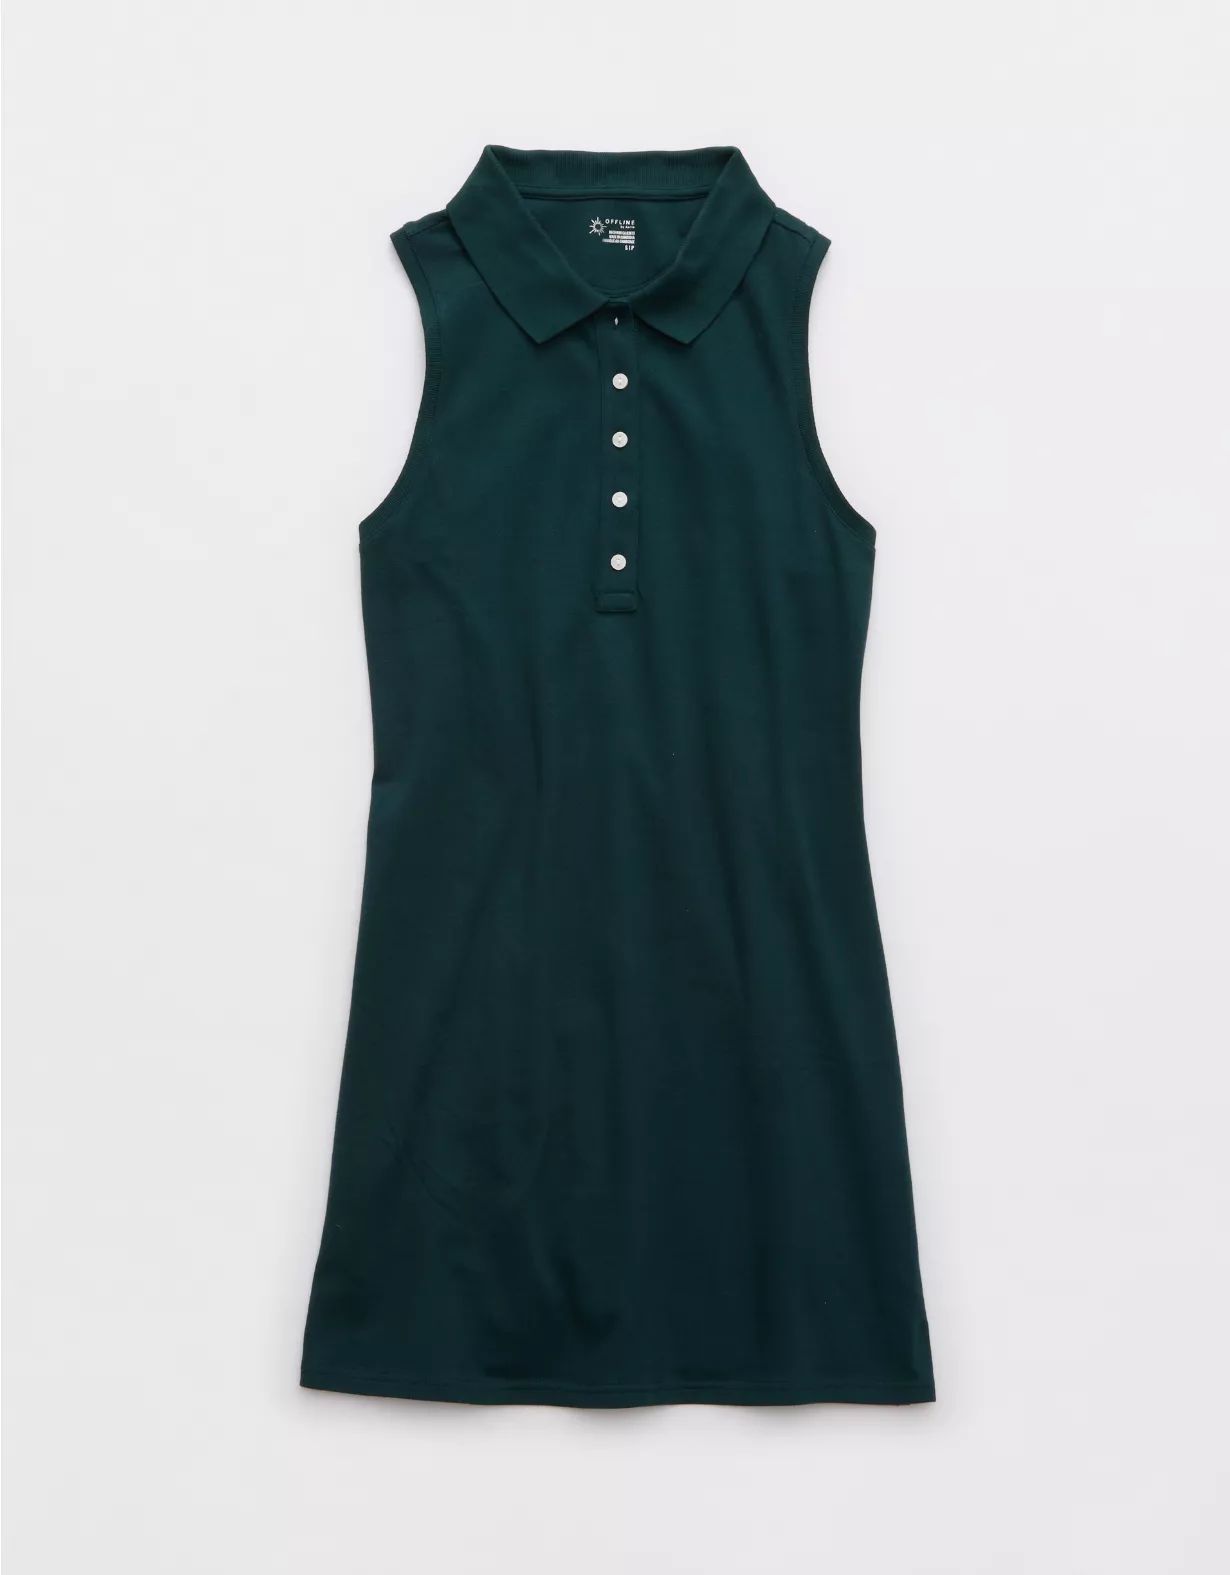 OFFLINE By Aerie Courtside Polo Mini Dress | Aerie